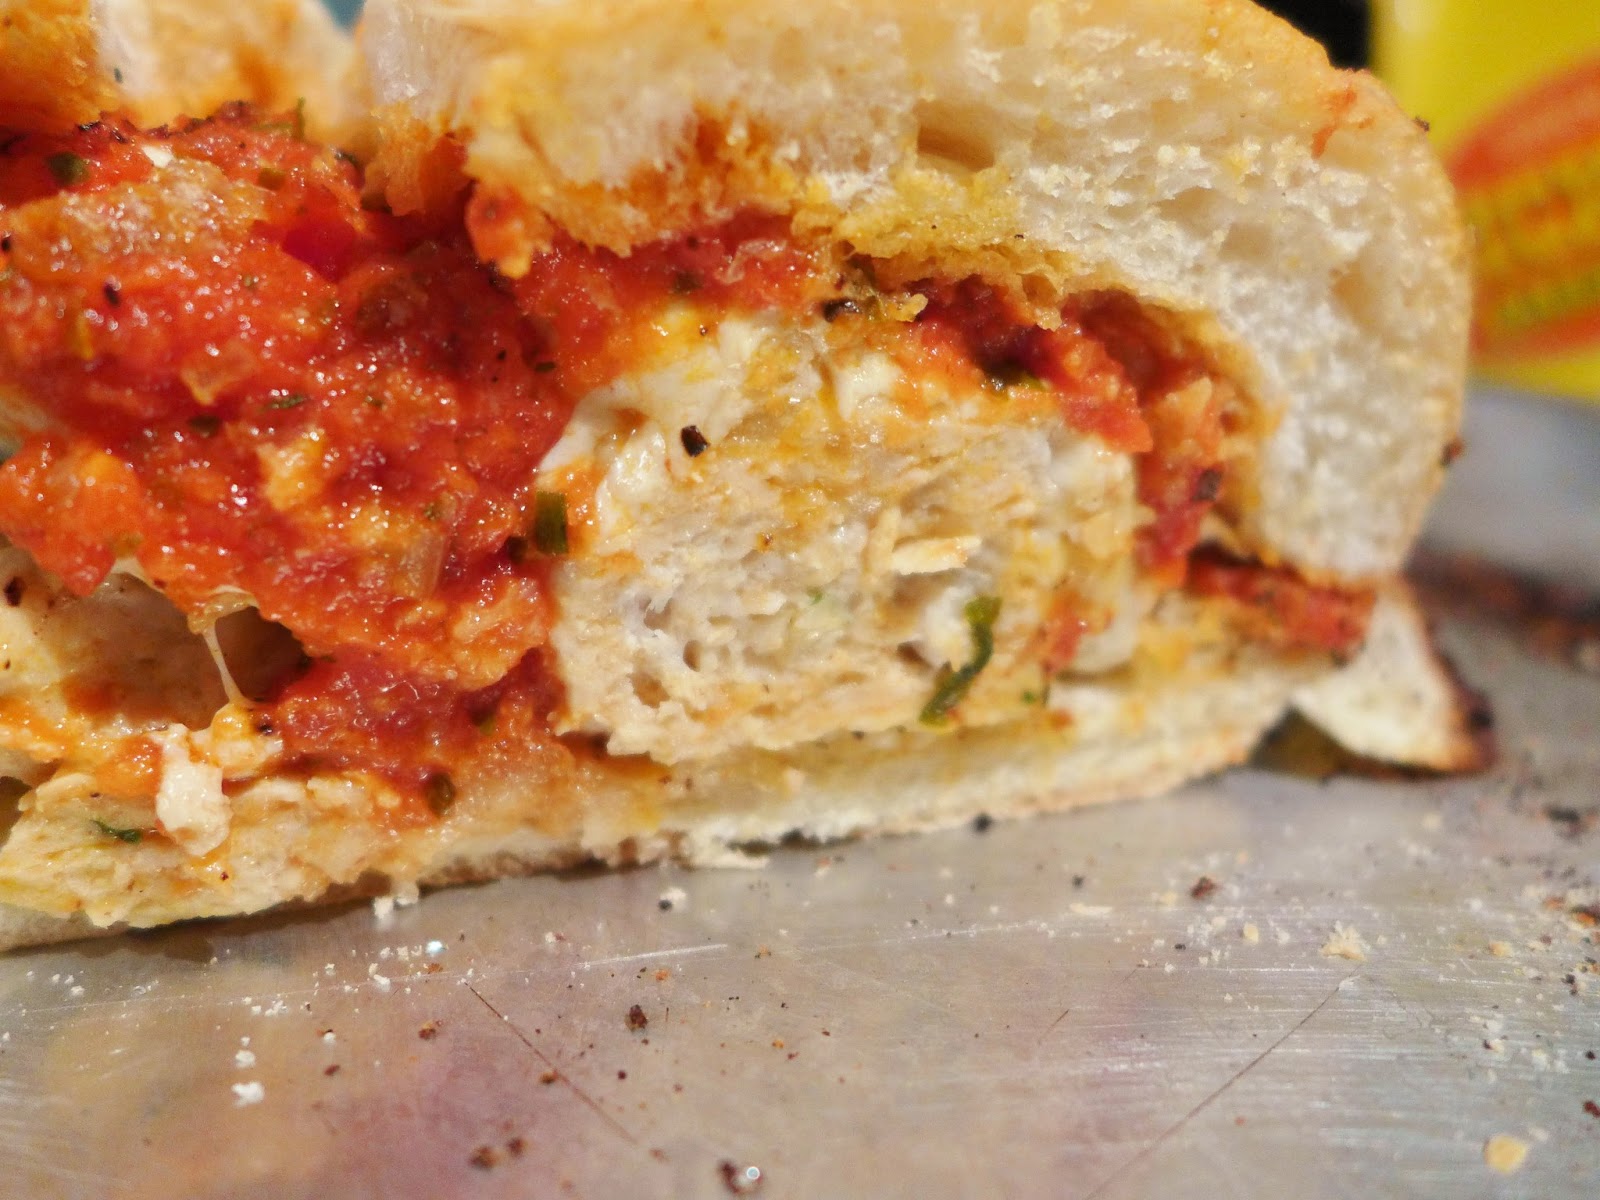 Dimples & Delights: Chicken Parmesan Meatball Sandwiches